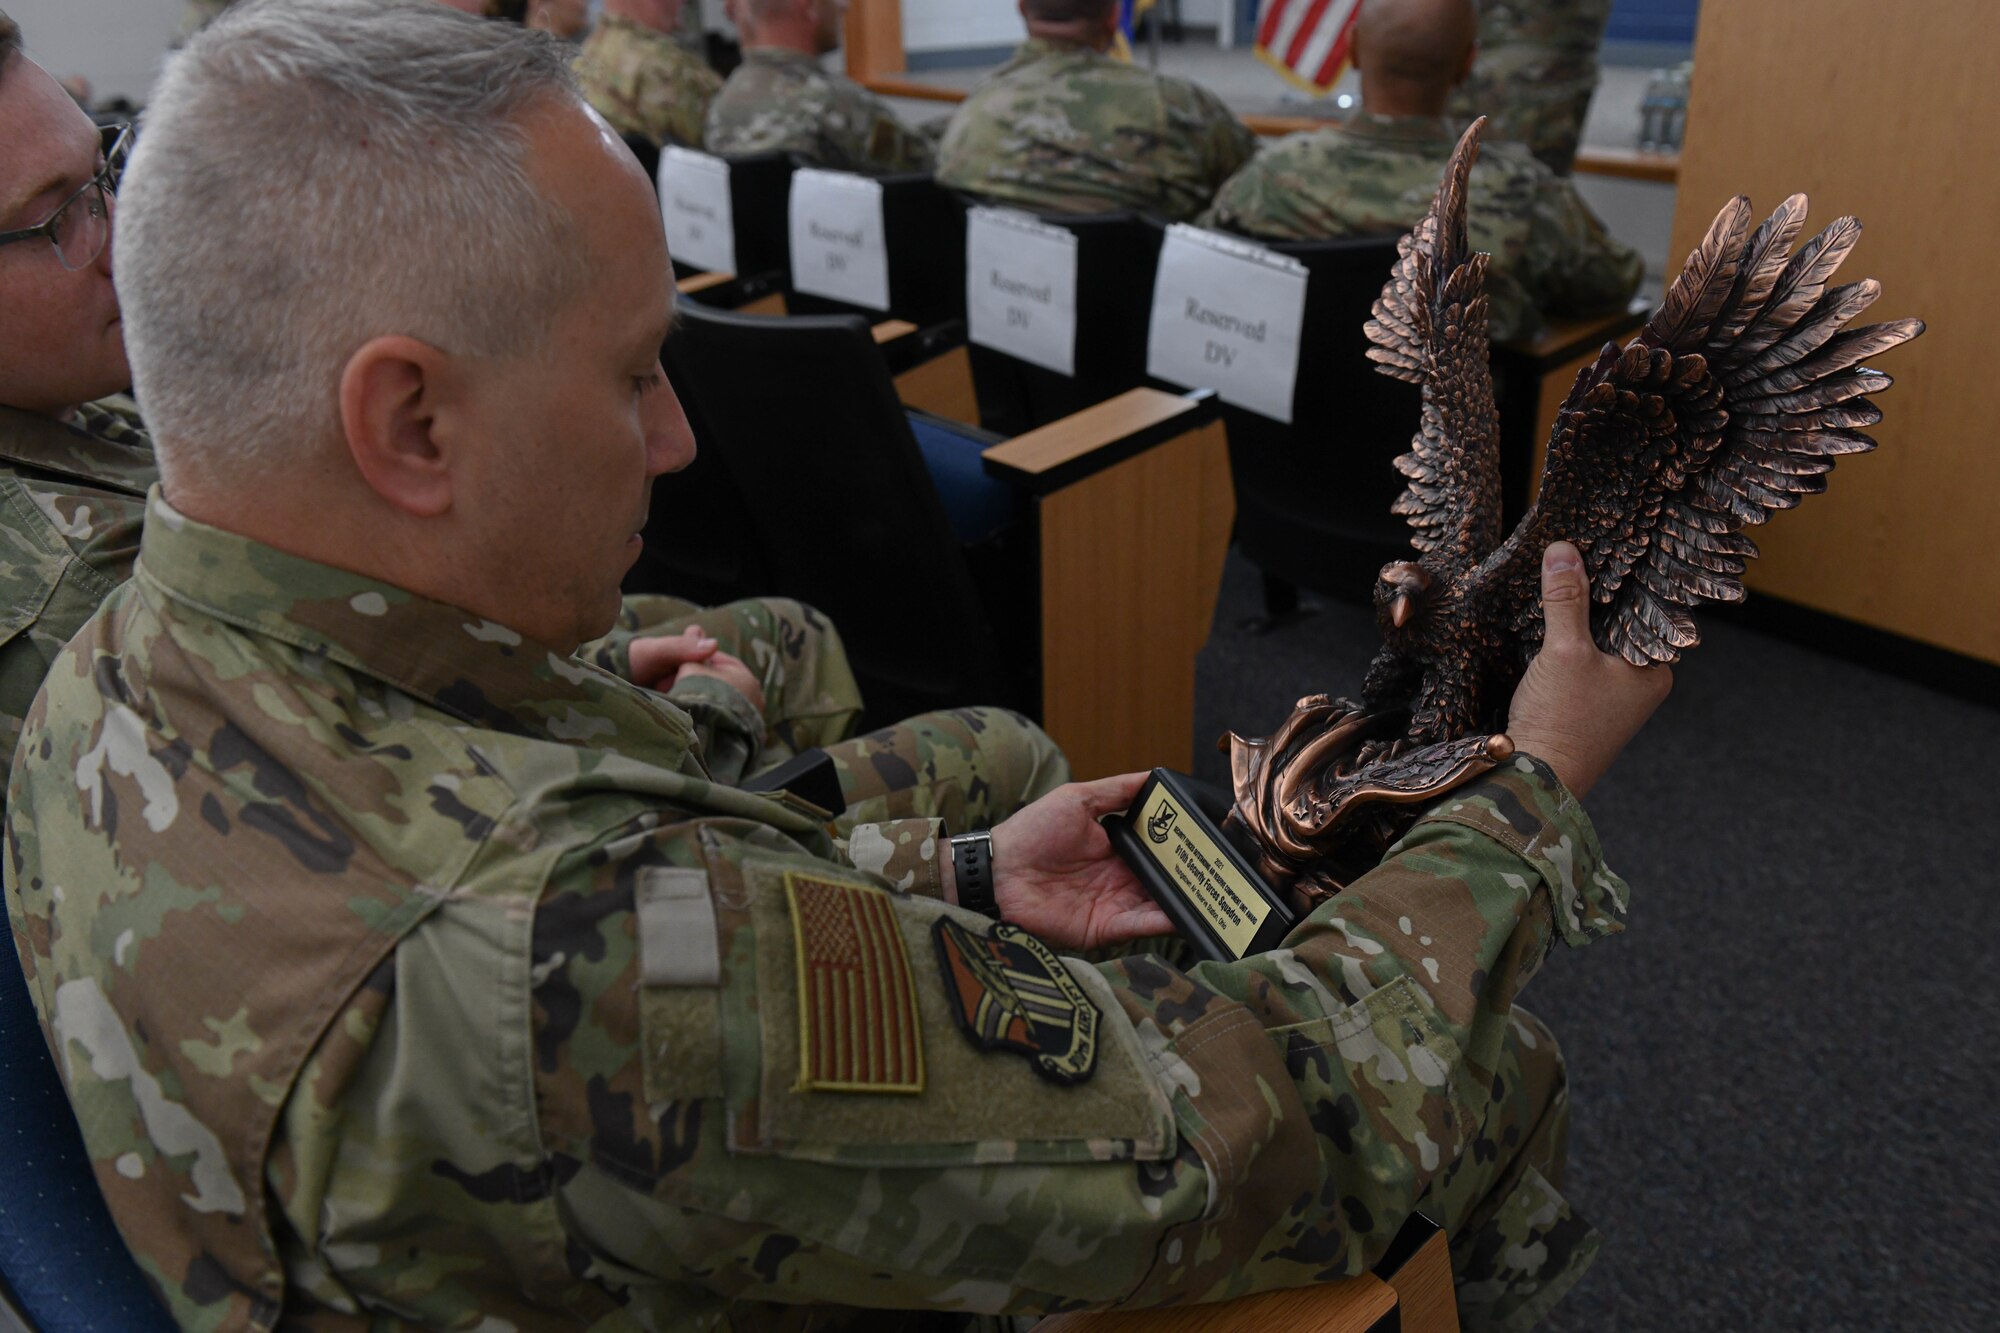 Brig. Gen. Roy W. Collins, director of security forces, Headquarters U.S. Air Force, visited the 910th SFS during the June UTA to present a trophy commemorating the unit being named the security forces outstanding Air Reserve component of the year for 2021 and observe the unit’s operations.